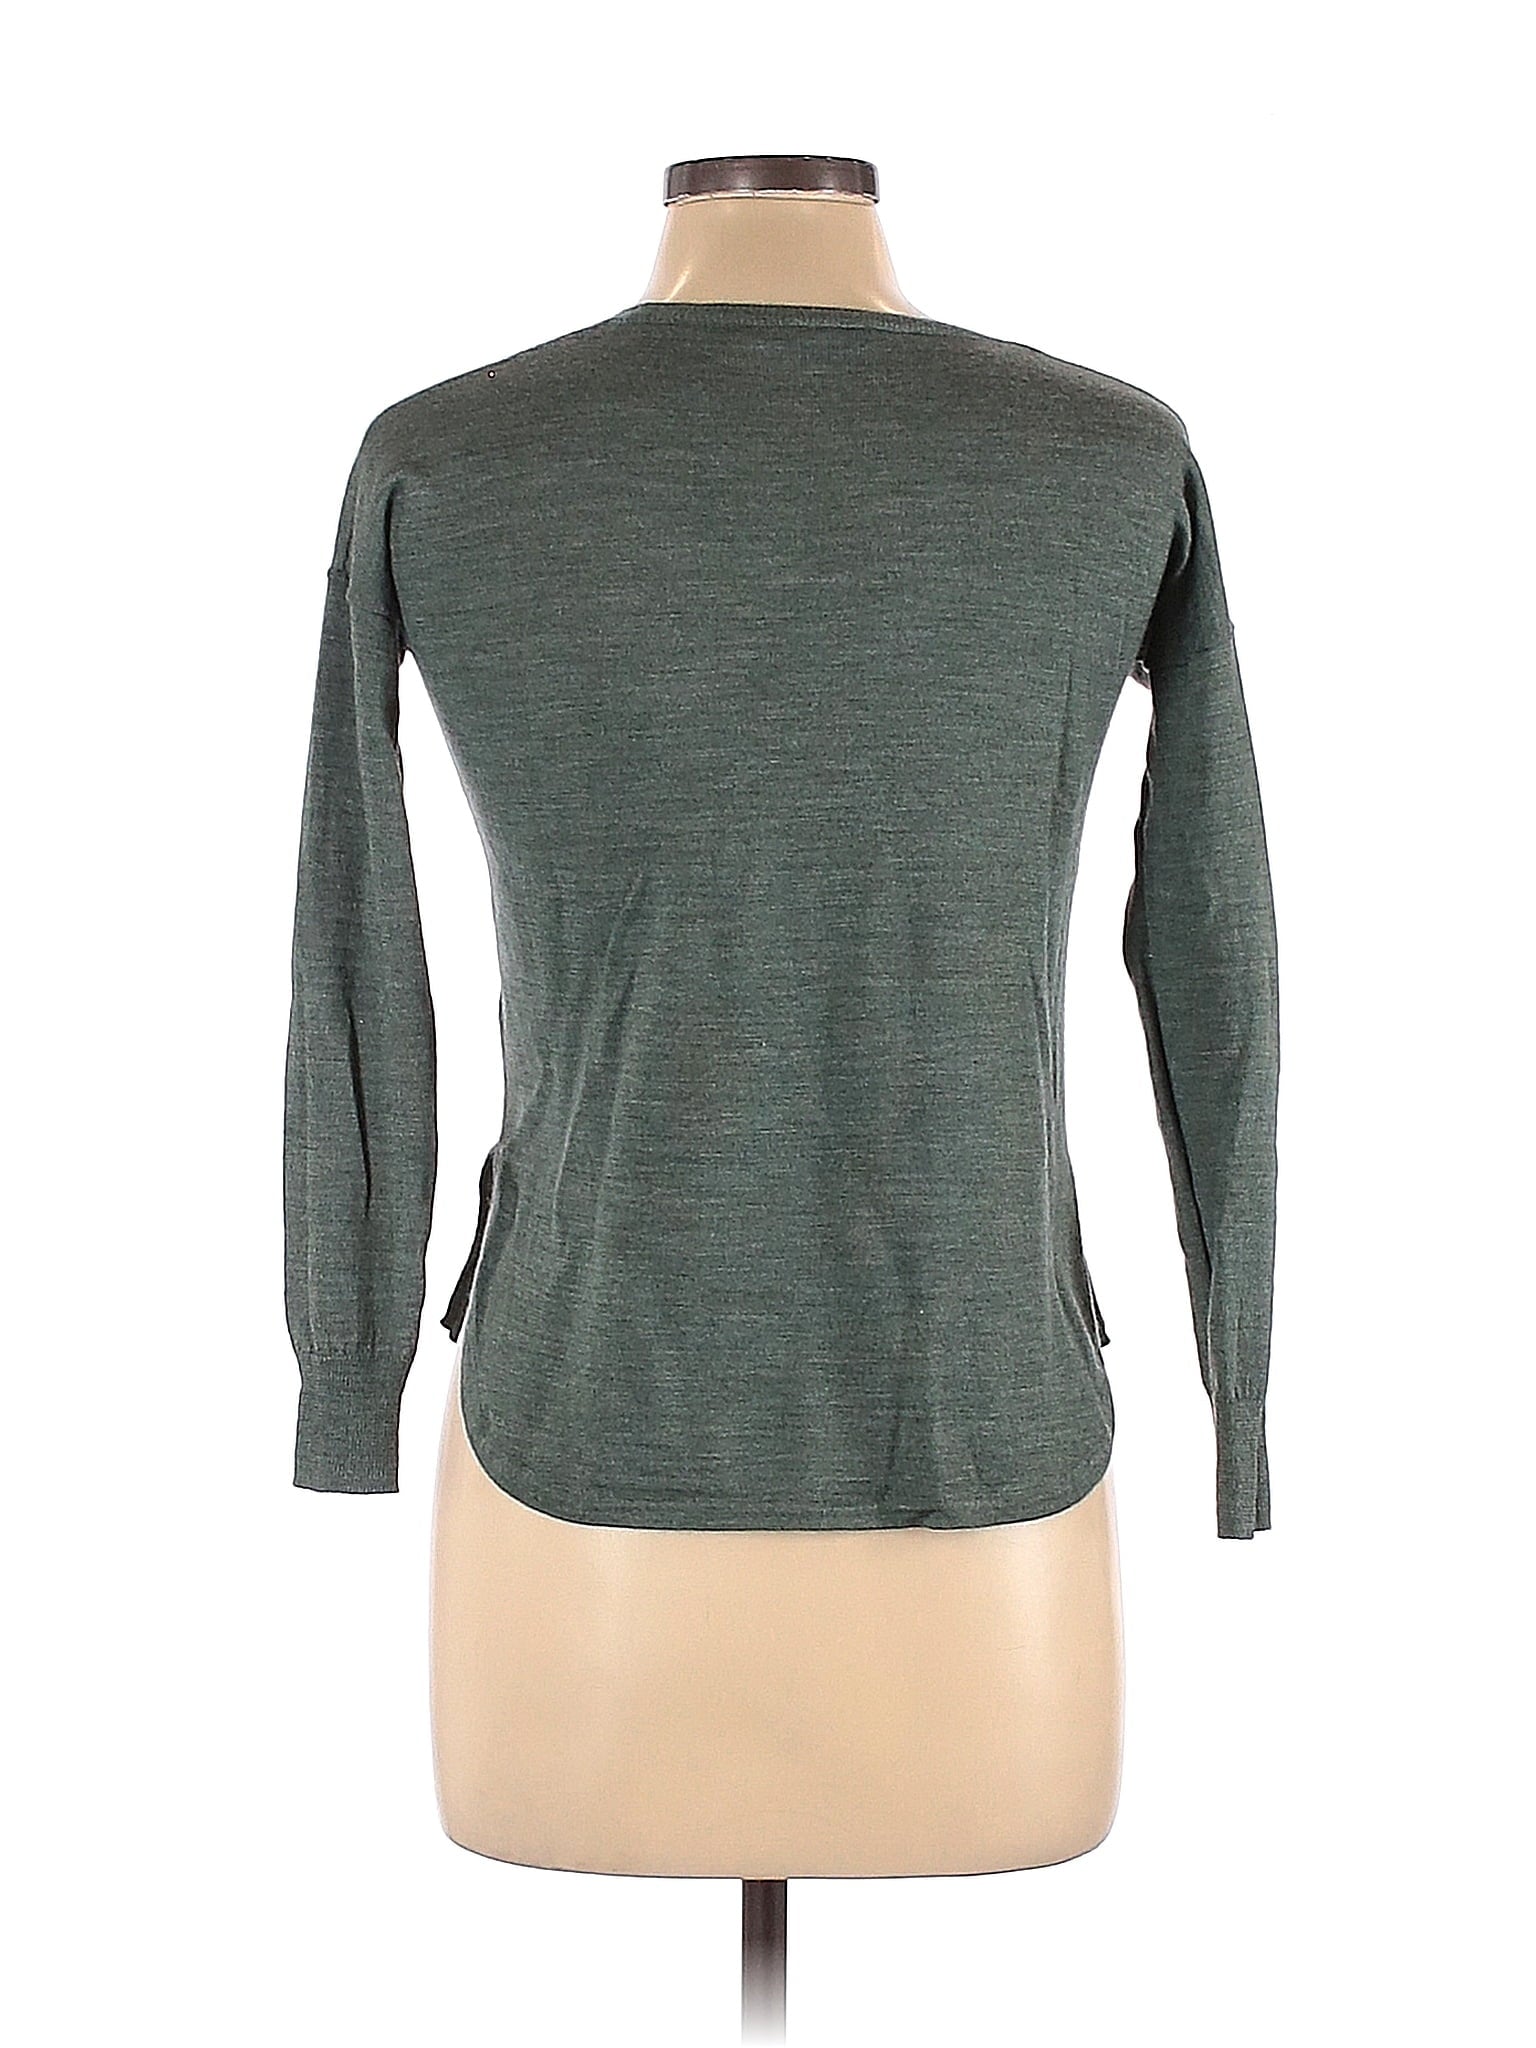 Pullover Sweater size - XXS